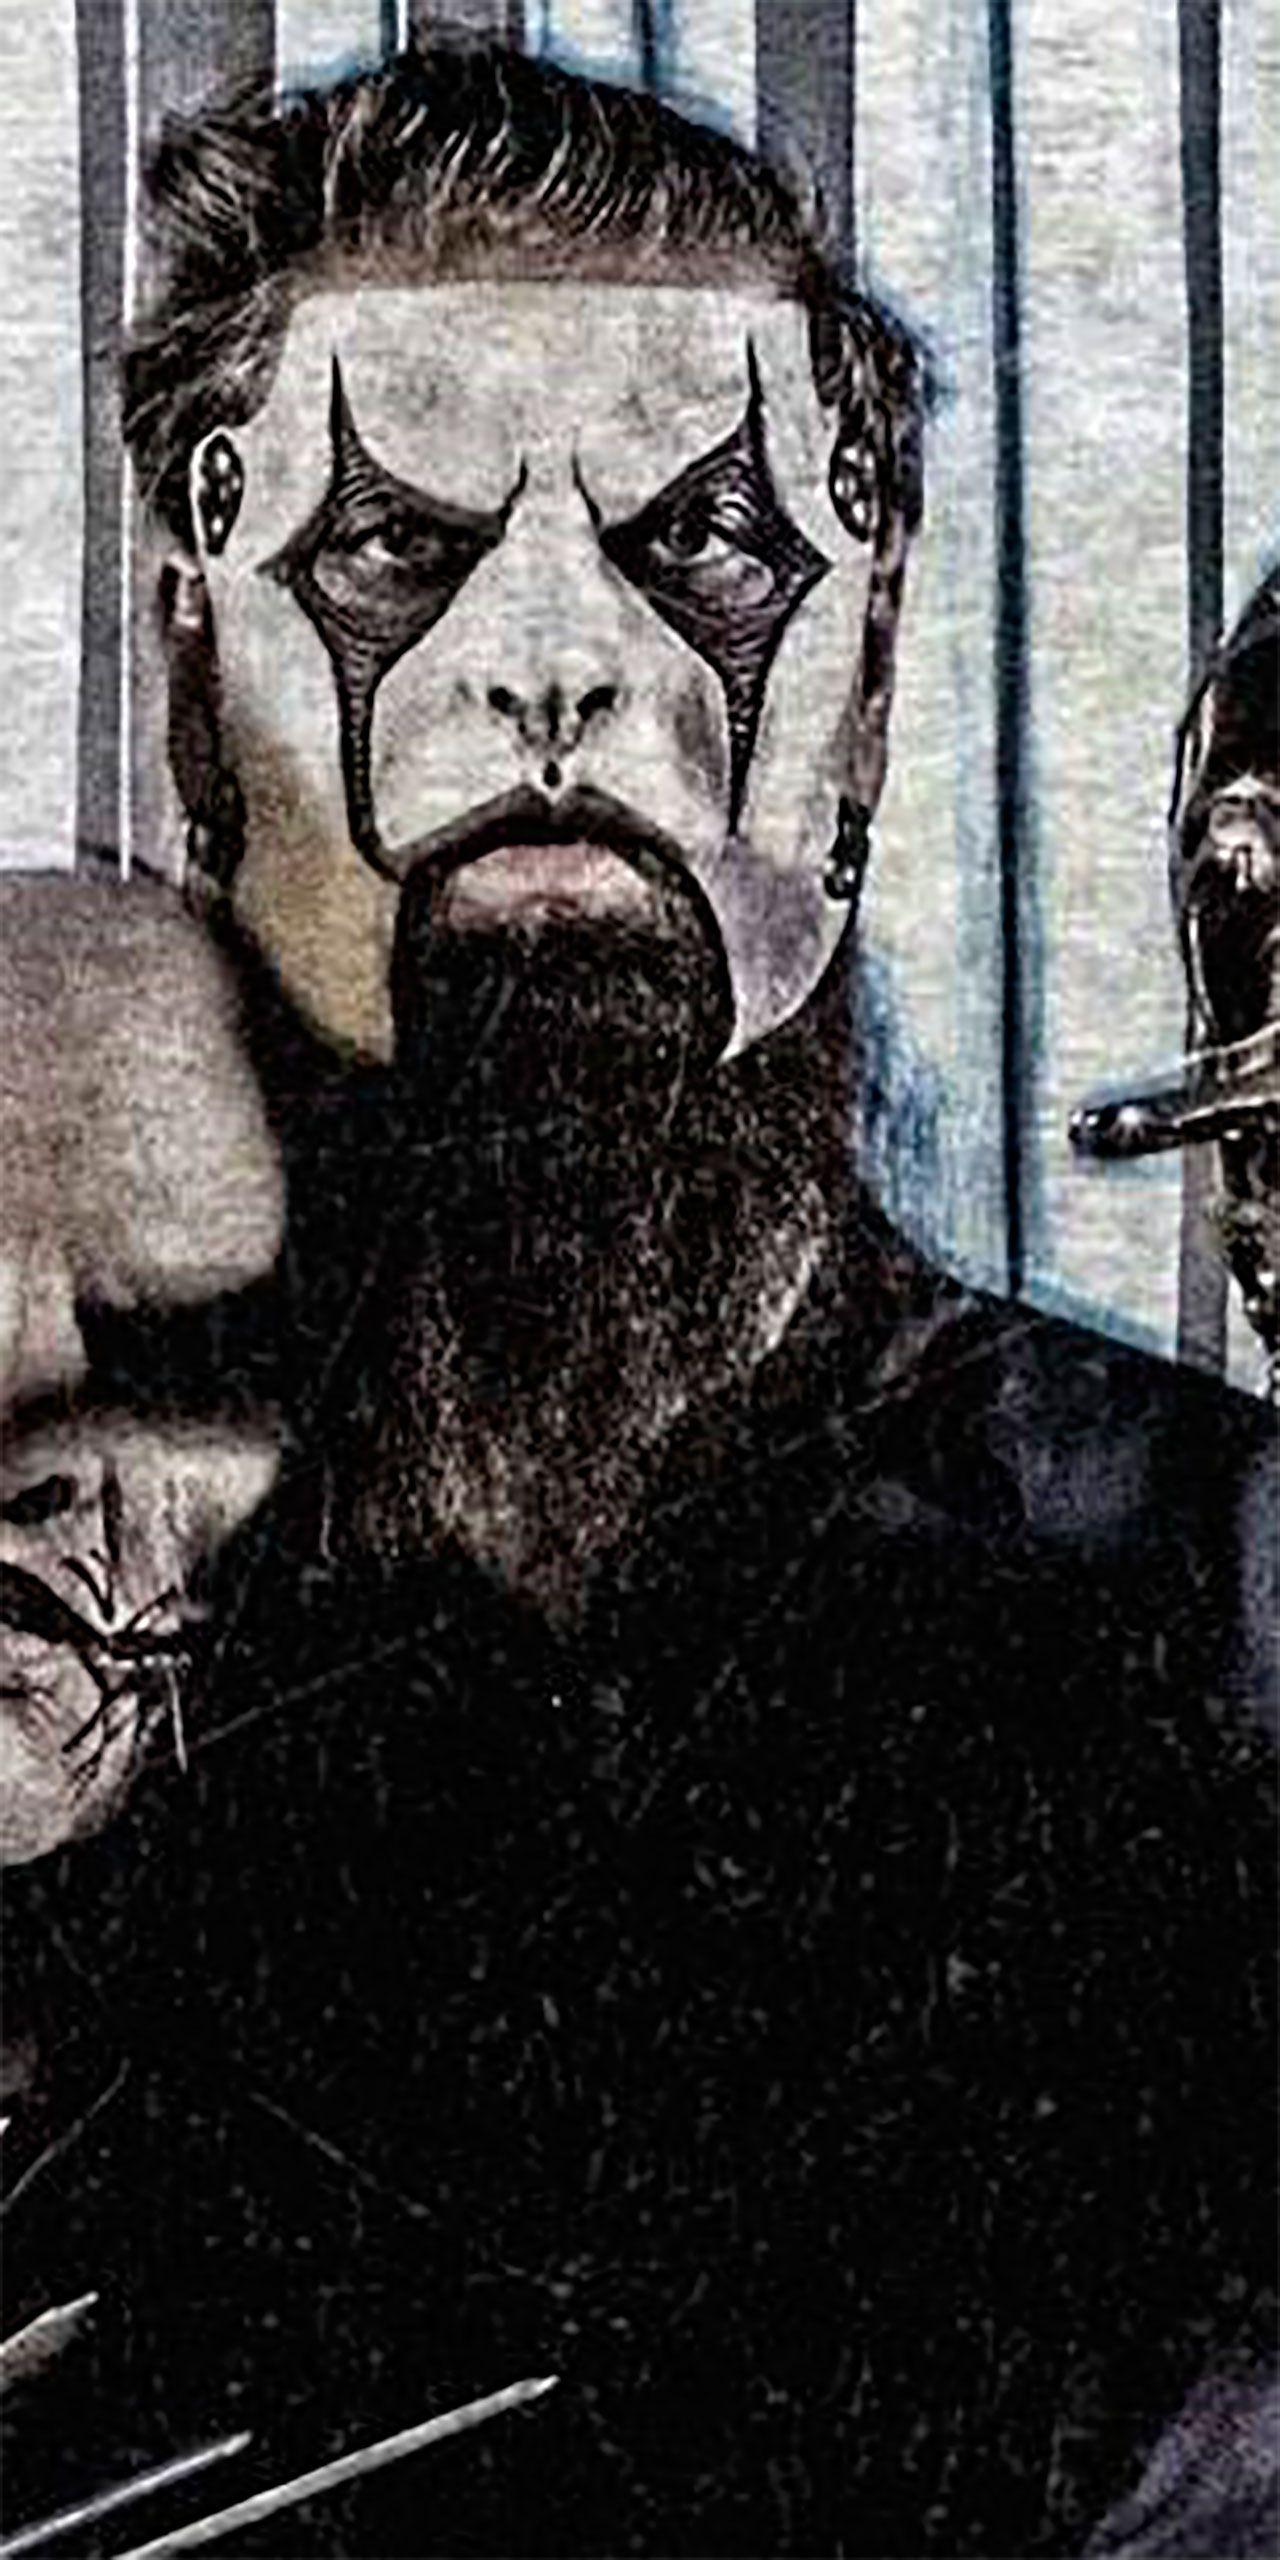 Jim Root. James Root. Slipknot and Stone sour